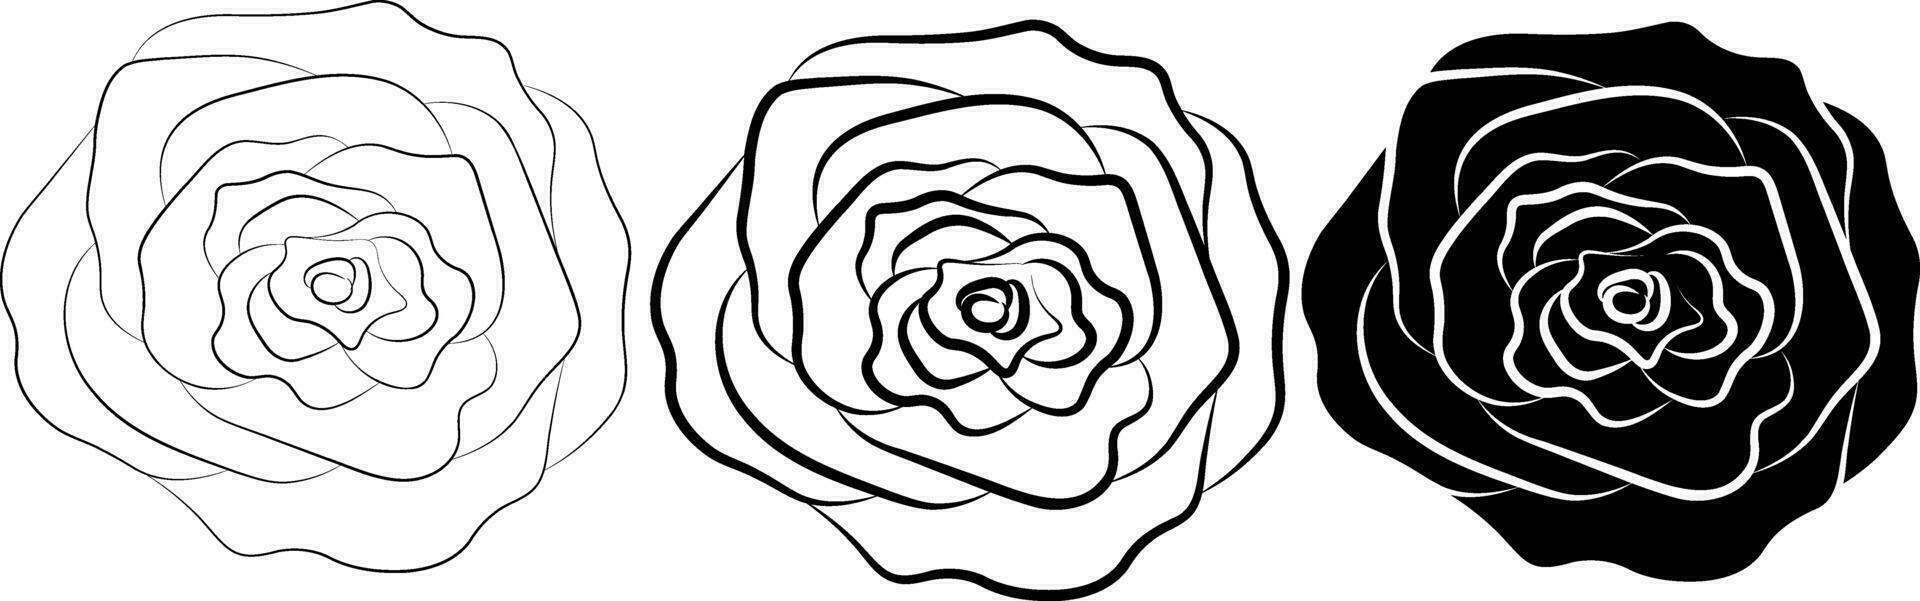 black white top view rose flower icon vector